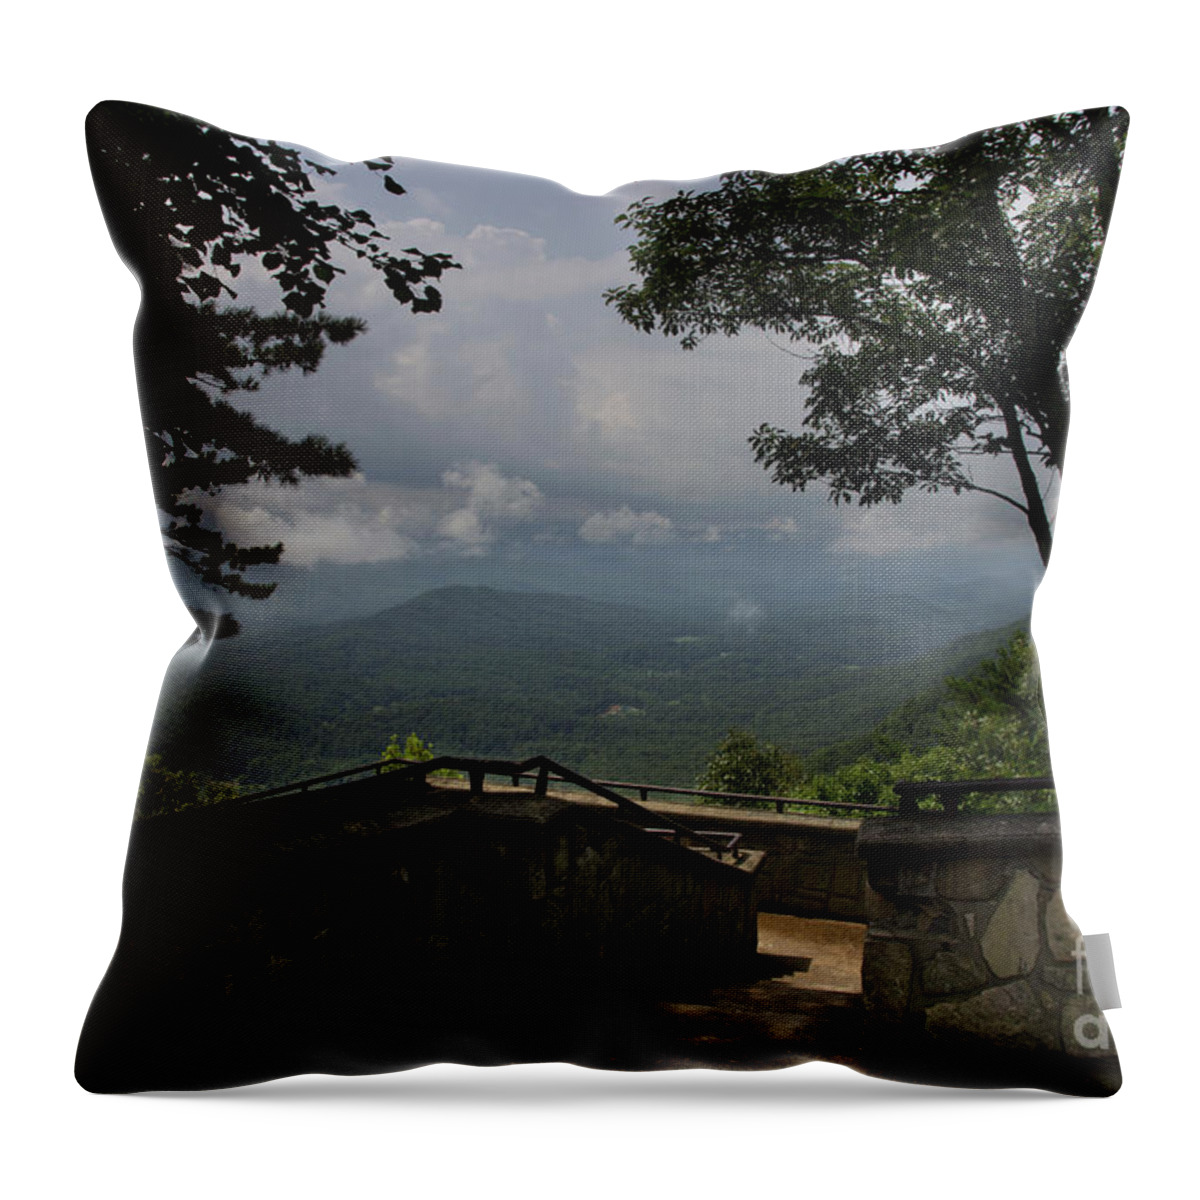 Smoky Mountains Throw Pillow featuring the photograph View From Above by Mike Eingle